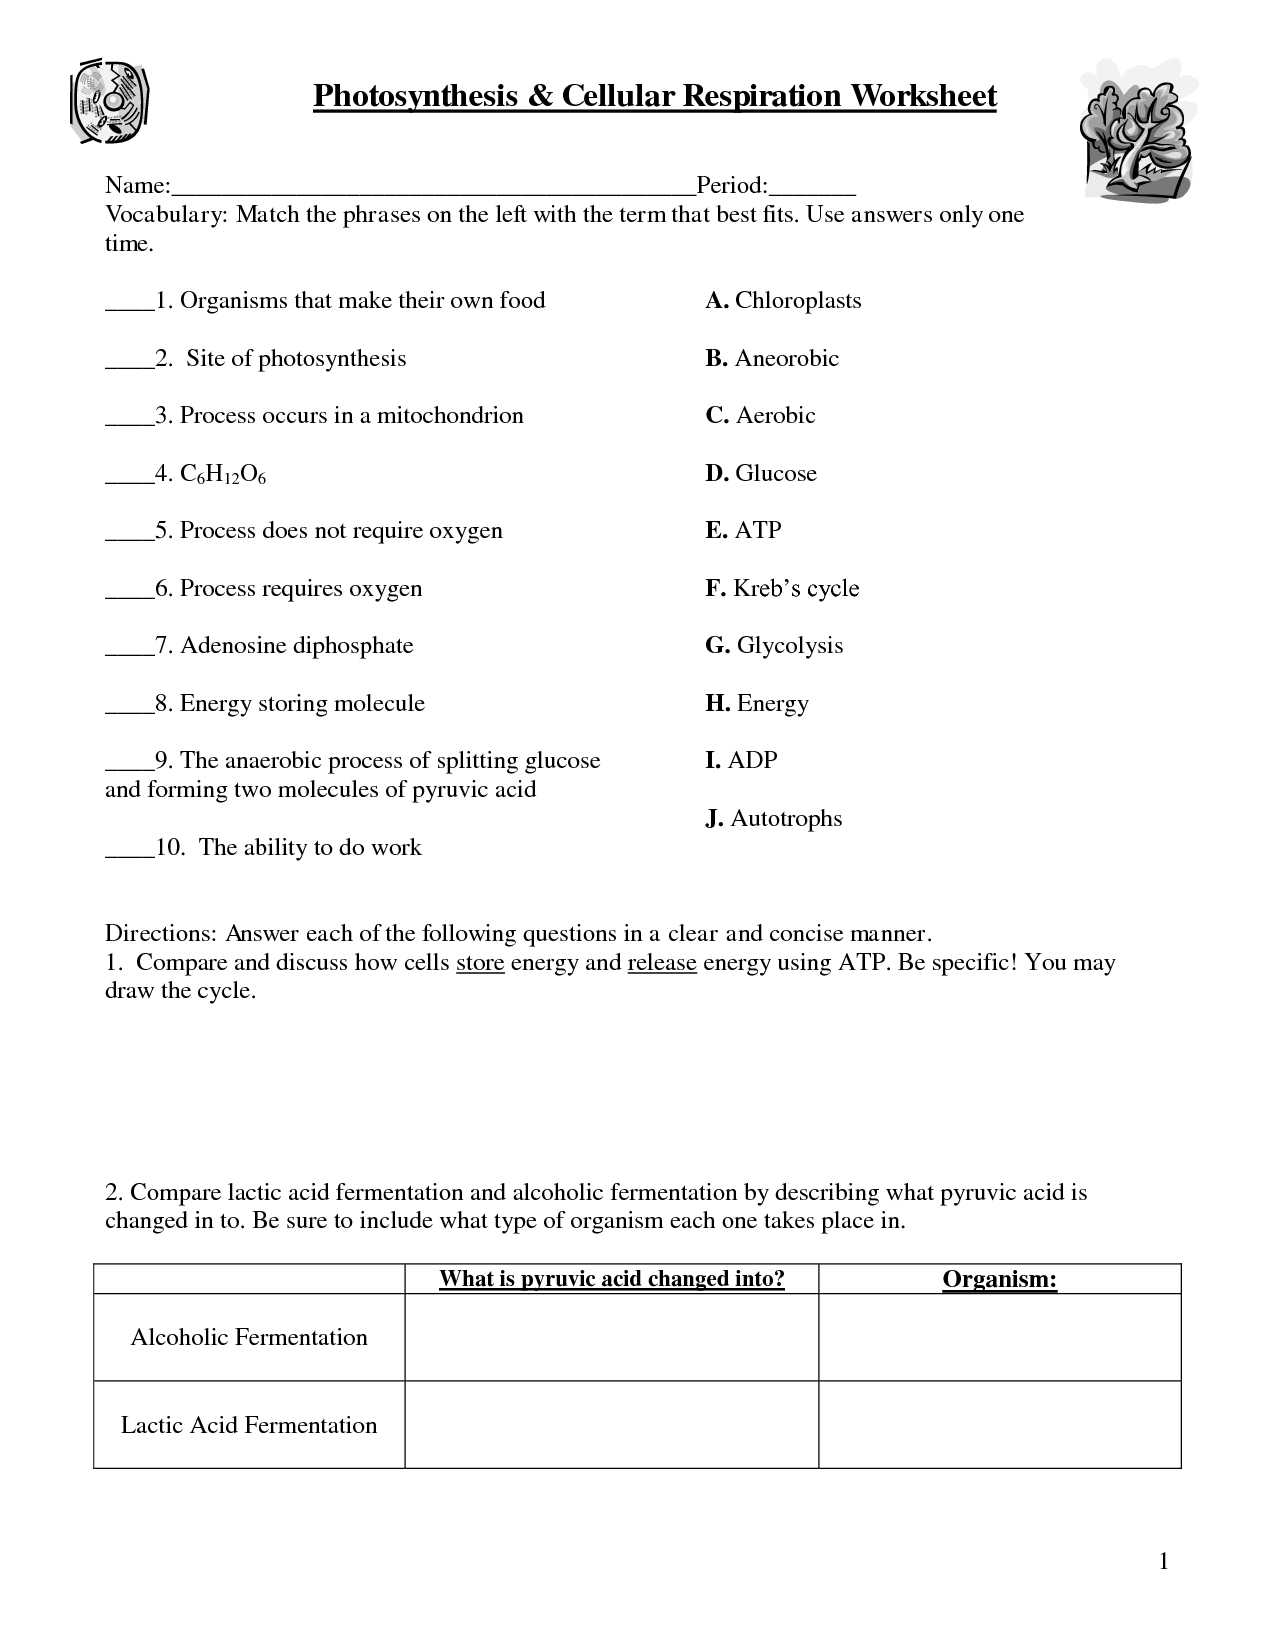 The Absorption Of Light by Photosynthetic Pigments Worksheet Answers with Synthesissword Puzzle Worksheet Worksheets for All Answers